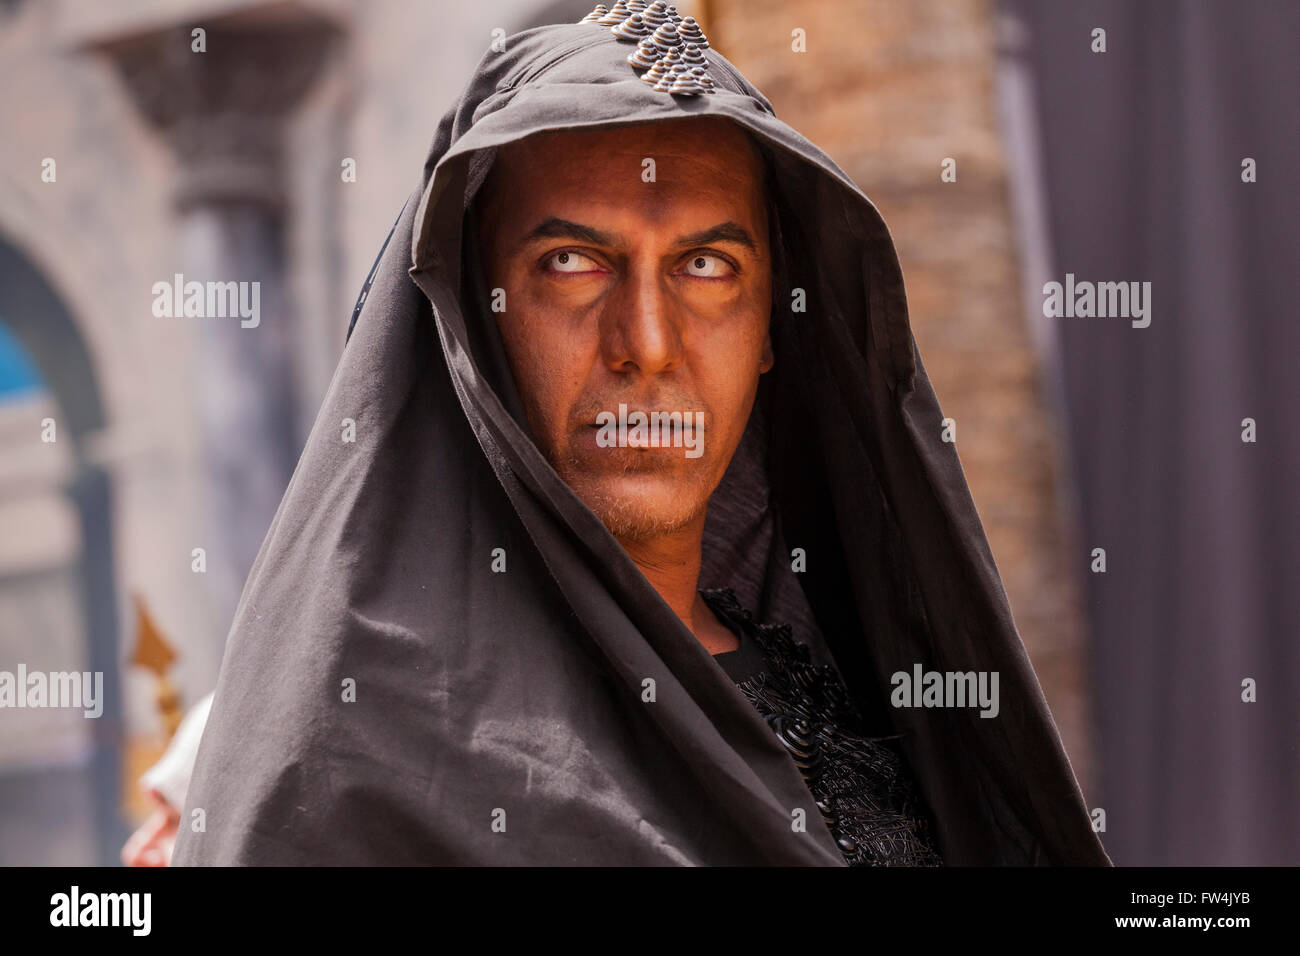 Actor with contact lenses and dark hood playing Satan in the Passion play, Adeje, Tenerife, Canary Islands, Spain. Representacio Stock Photo